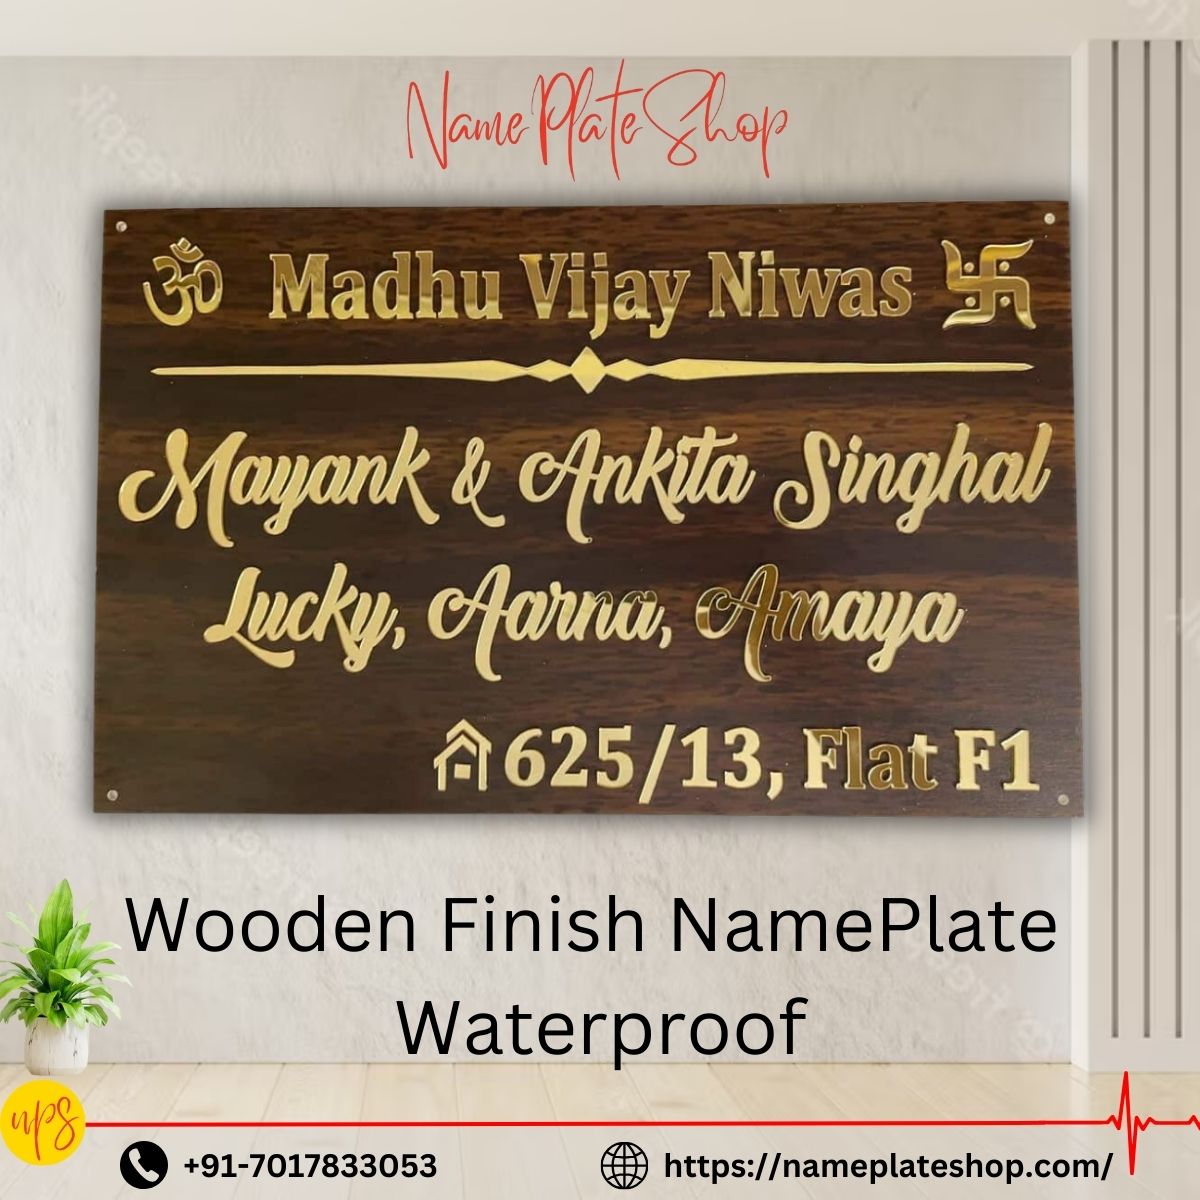 Discover the Ultimate Waterproof Nameplates at NameplateShop